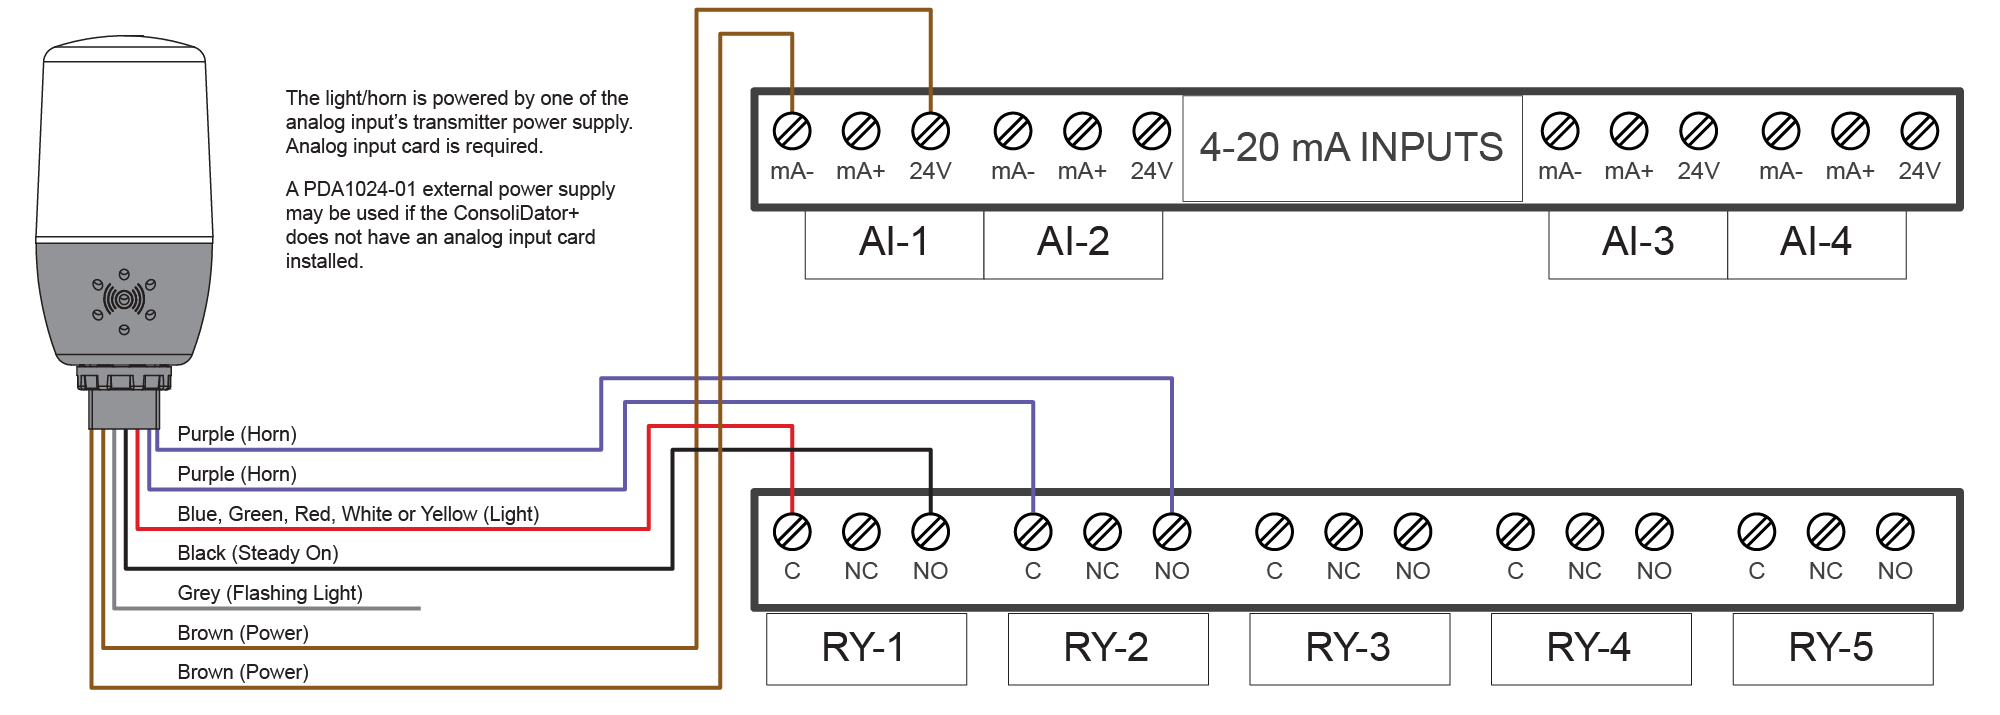 Wiring Connections for MOD-LH Models Using ConsoliDator+ Controller Internal Power Supply